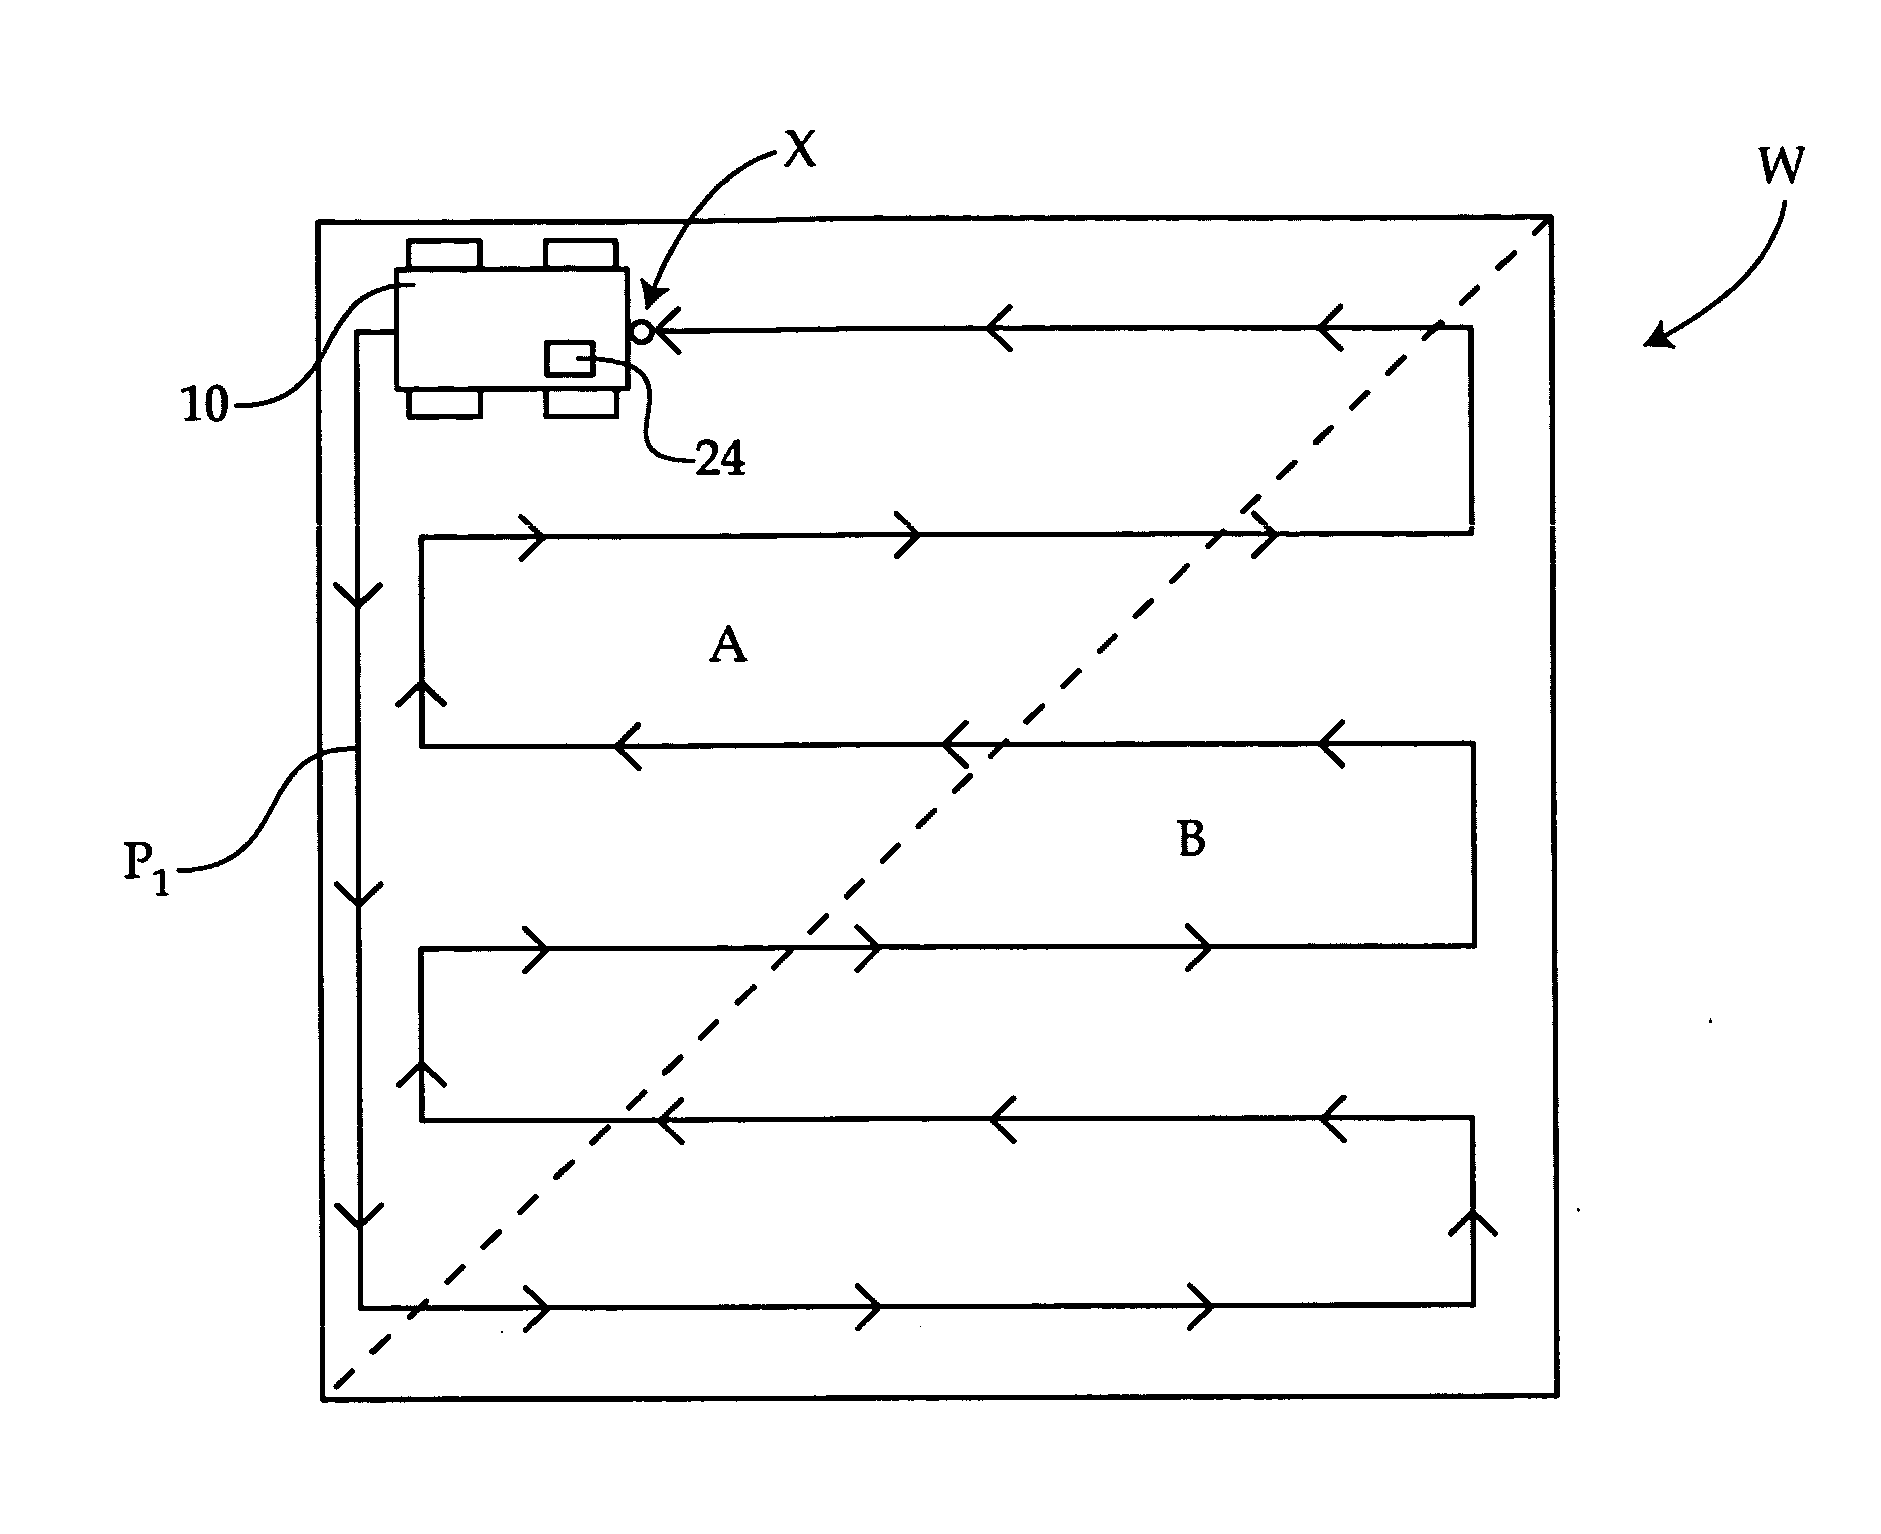 Method of operating a compactor machine via path planning based on compaction state data and mapping information